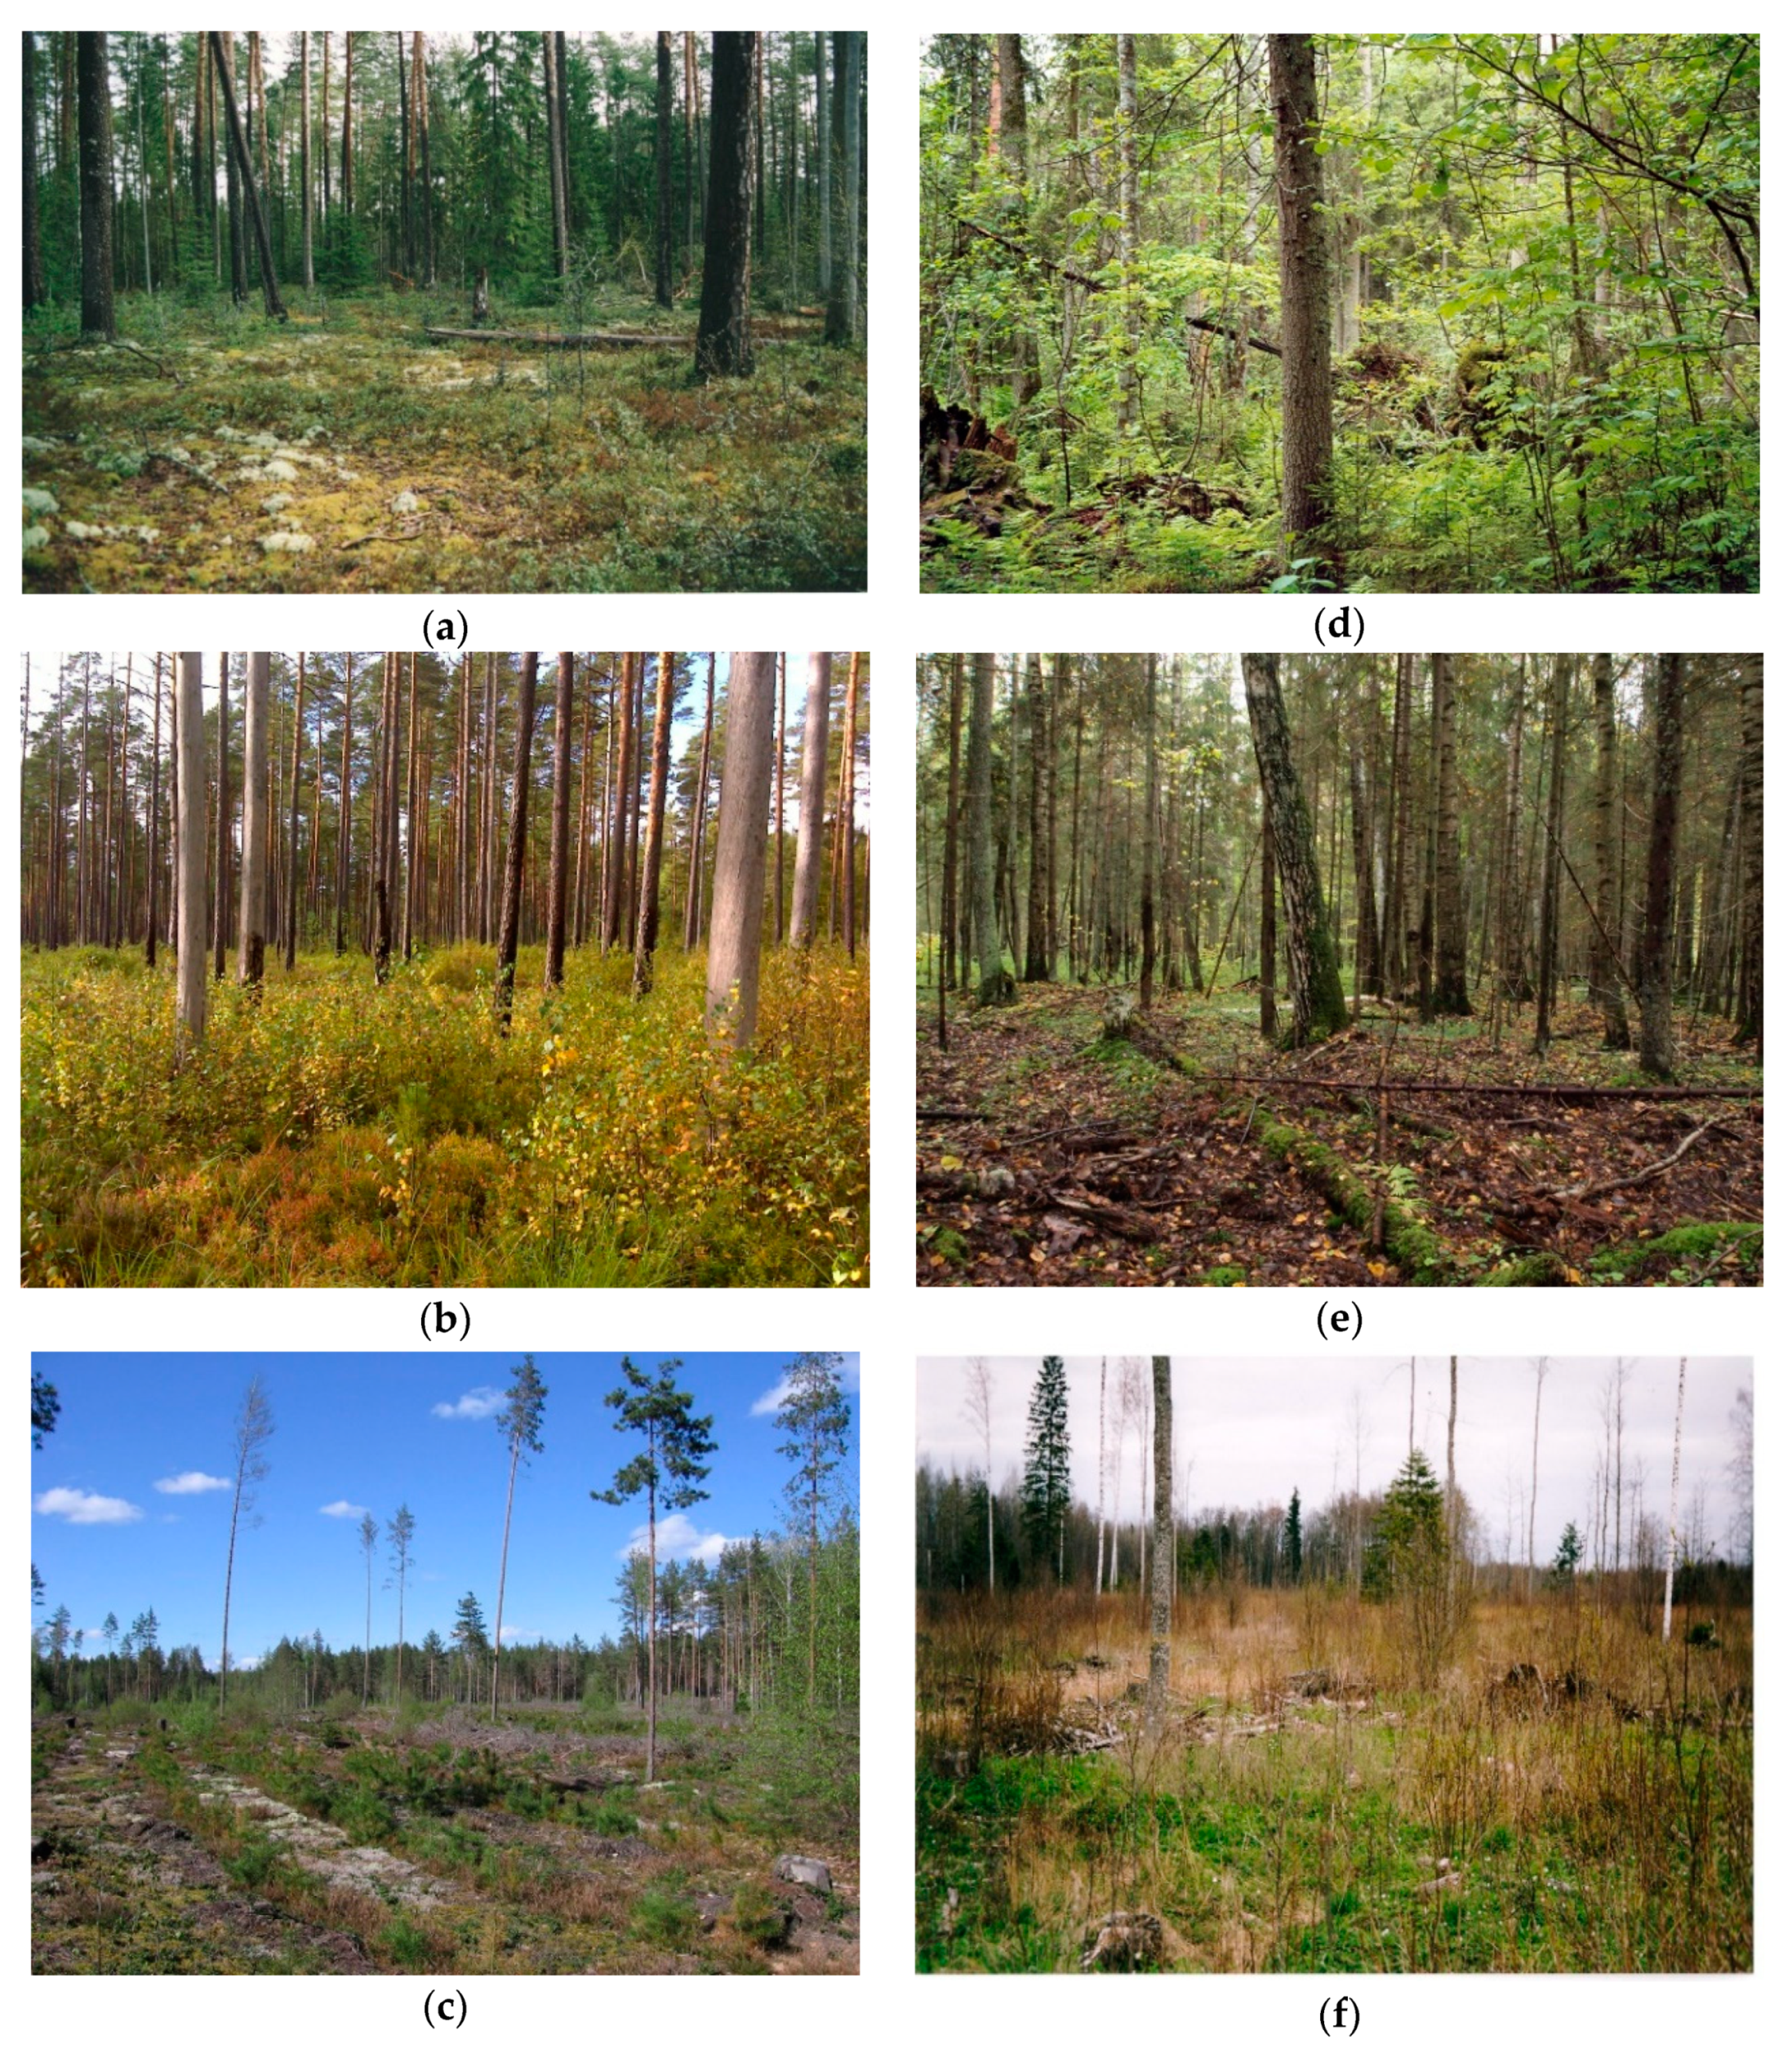 Forests | Free Full-Text | The Potential of Production Forests for ...